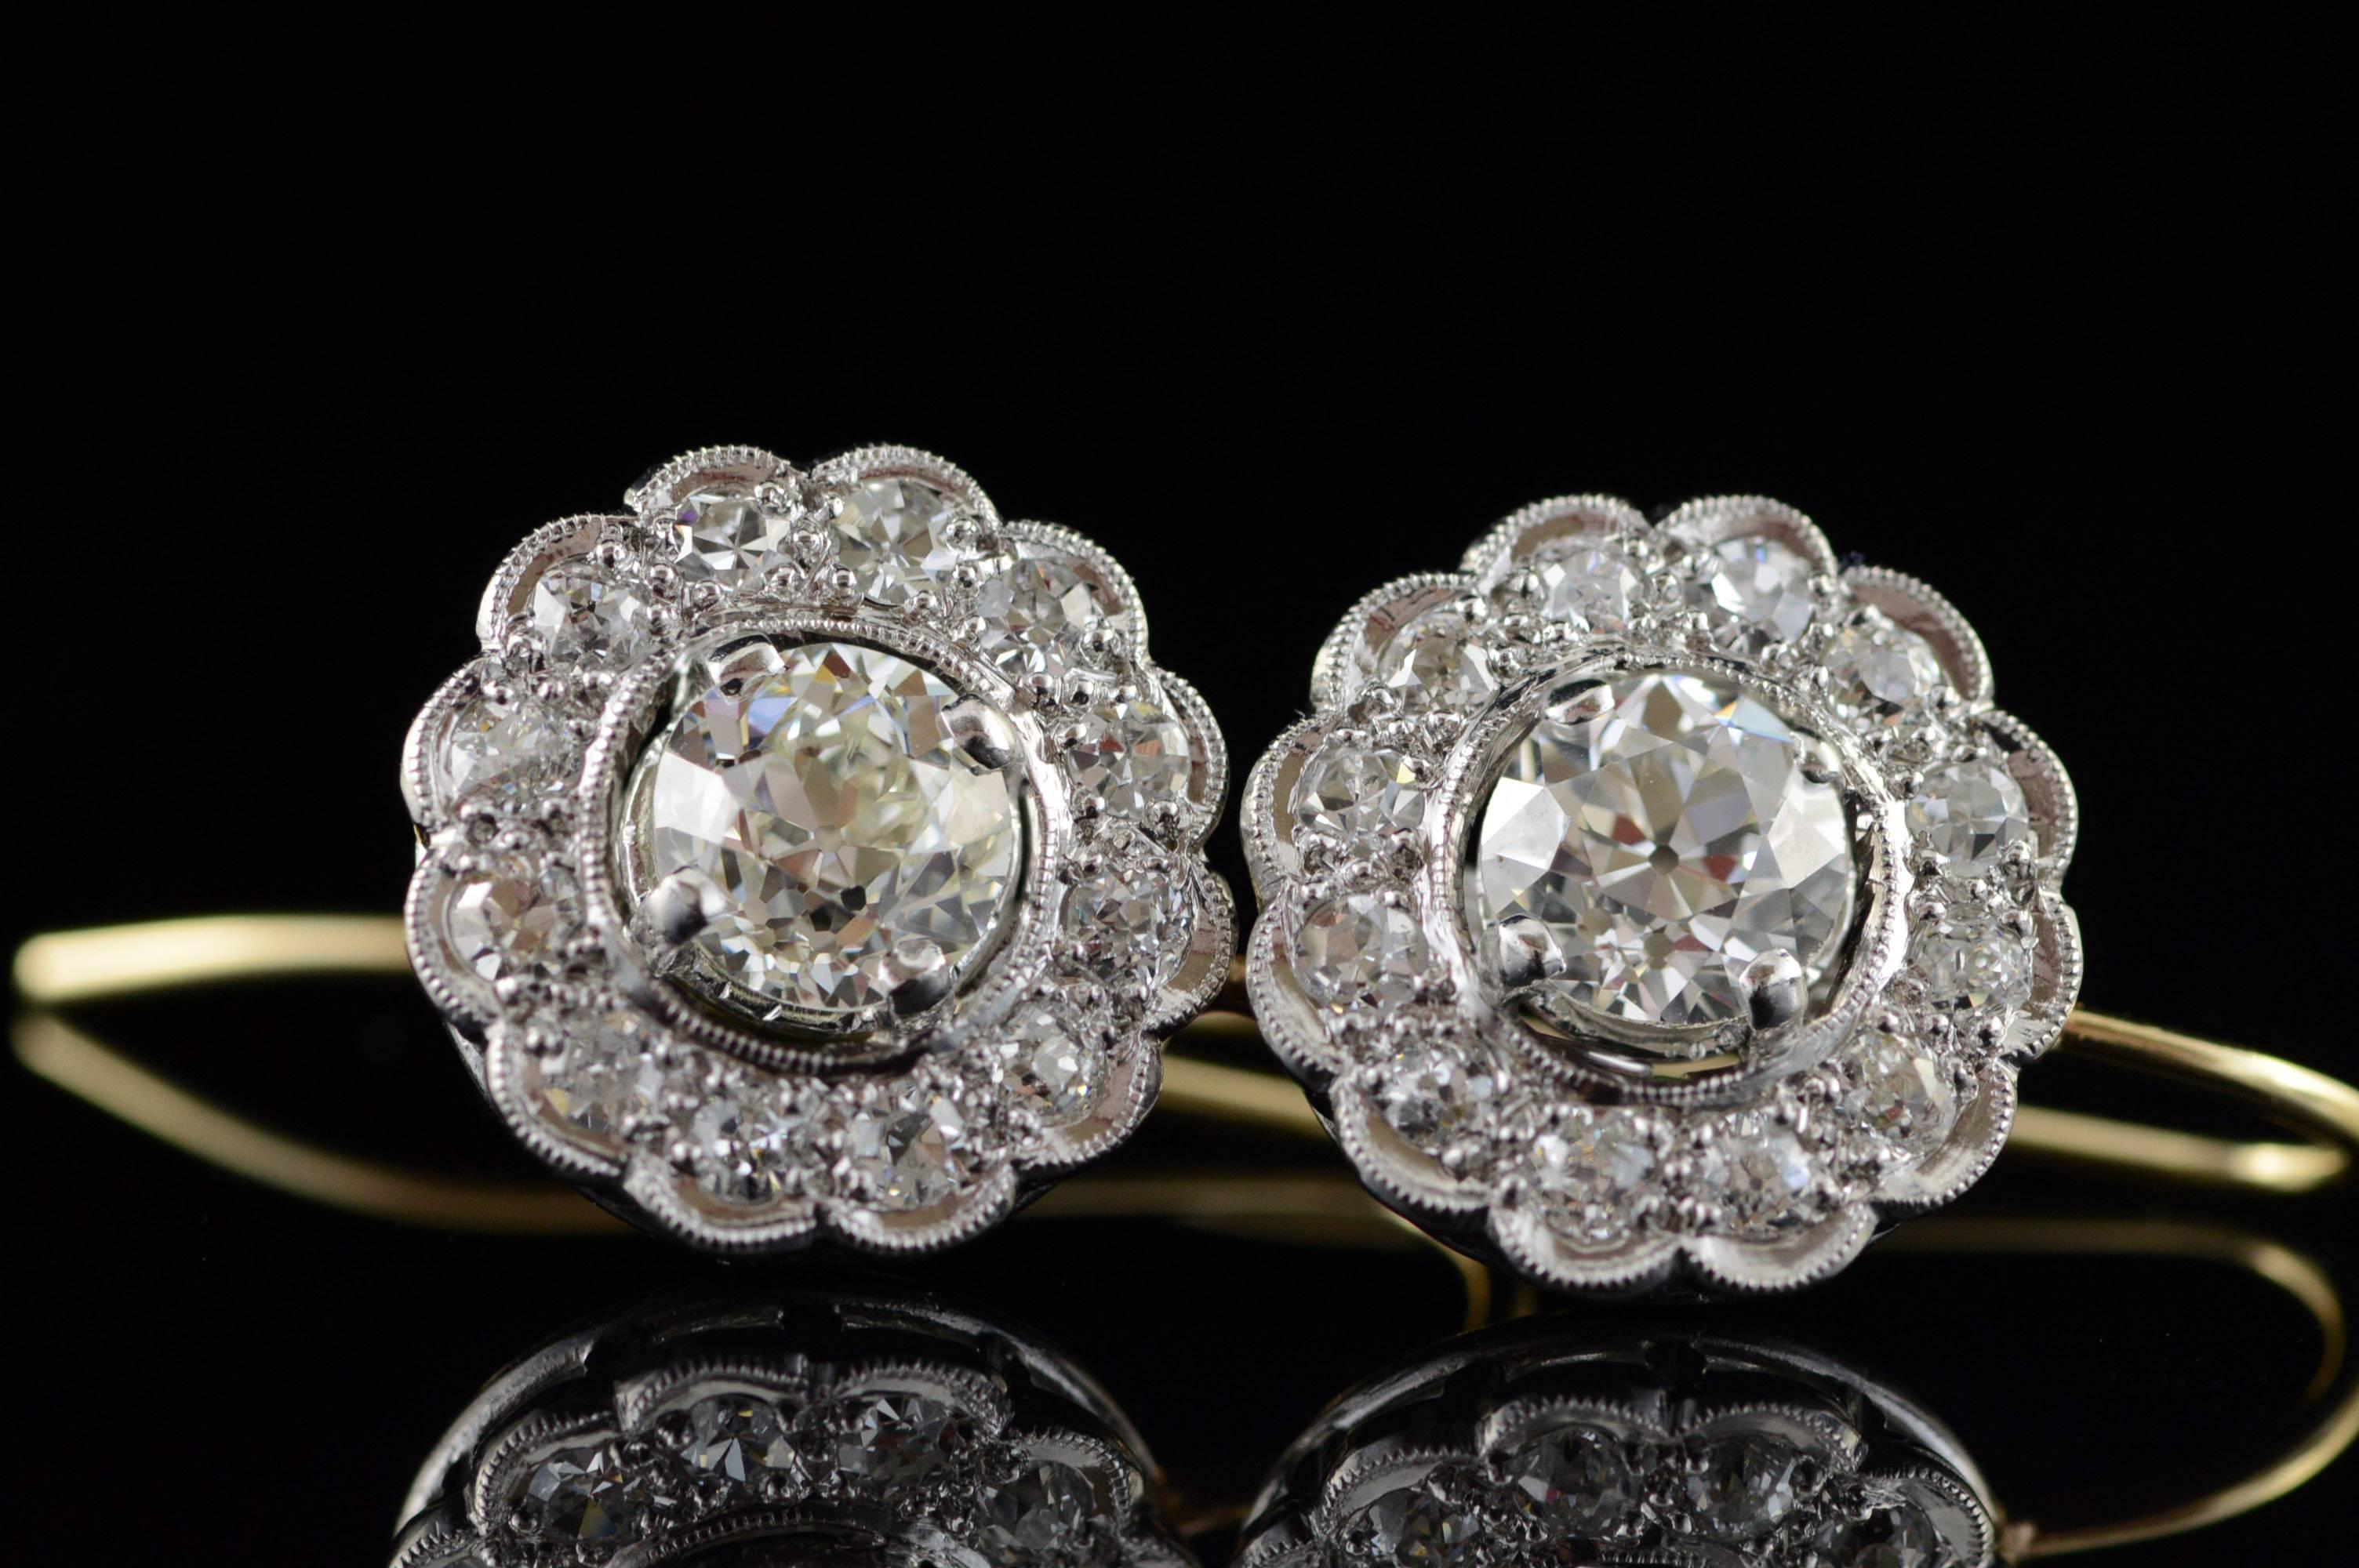 High Victorian 1.92 Carat Total Weight Victorian Diamond Earrings For Sale